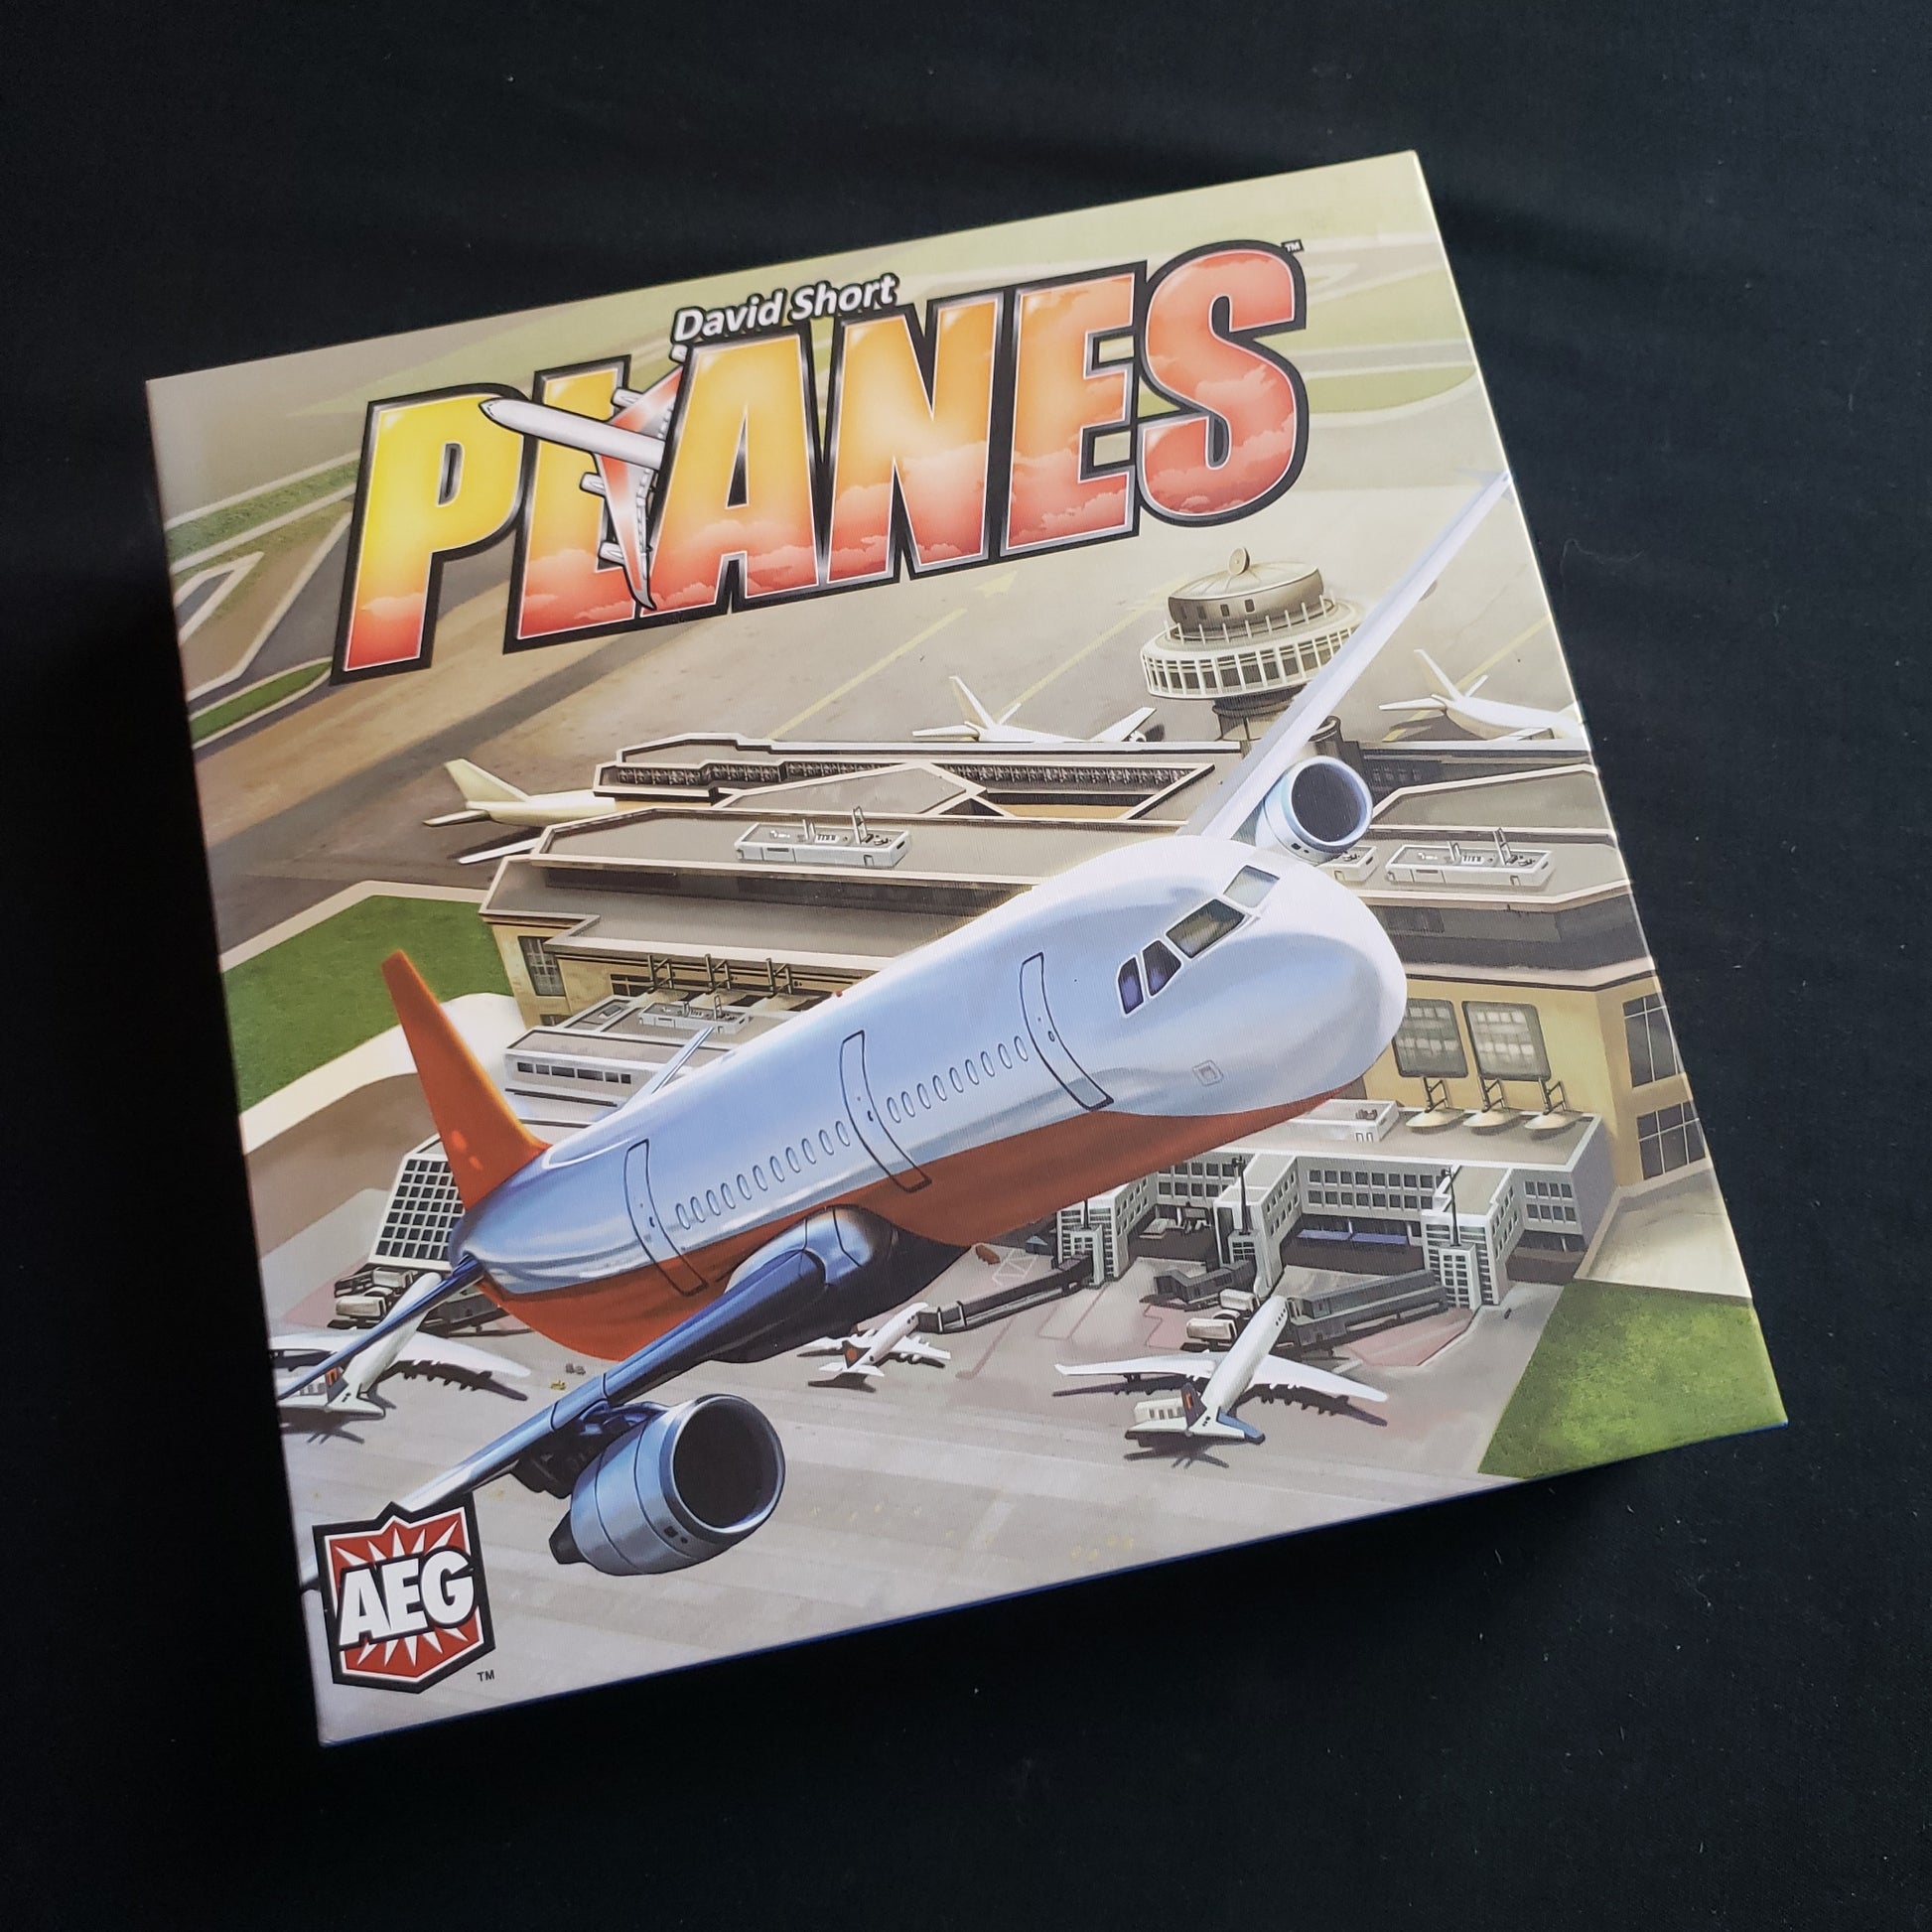 Image shows the front cover of the box of the Planes board game